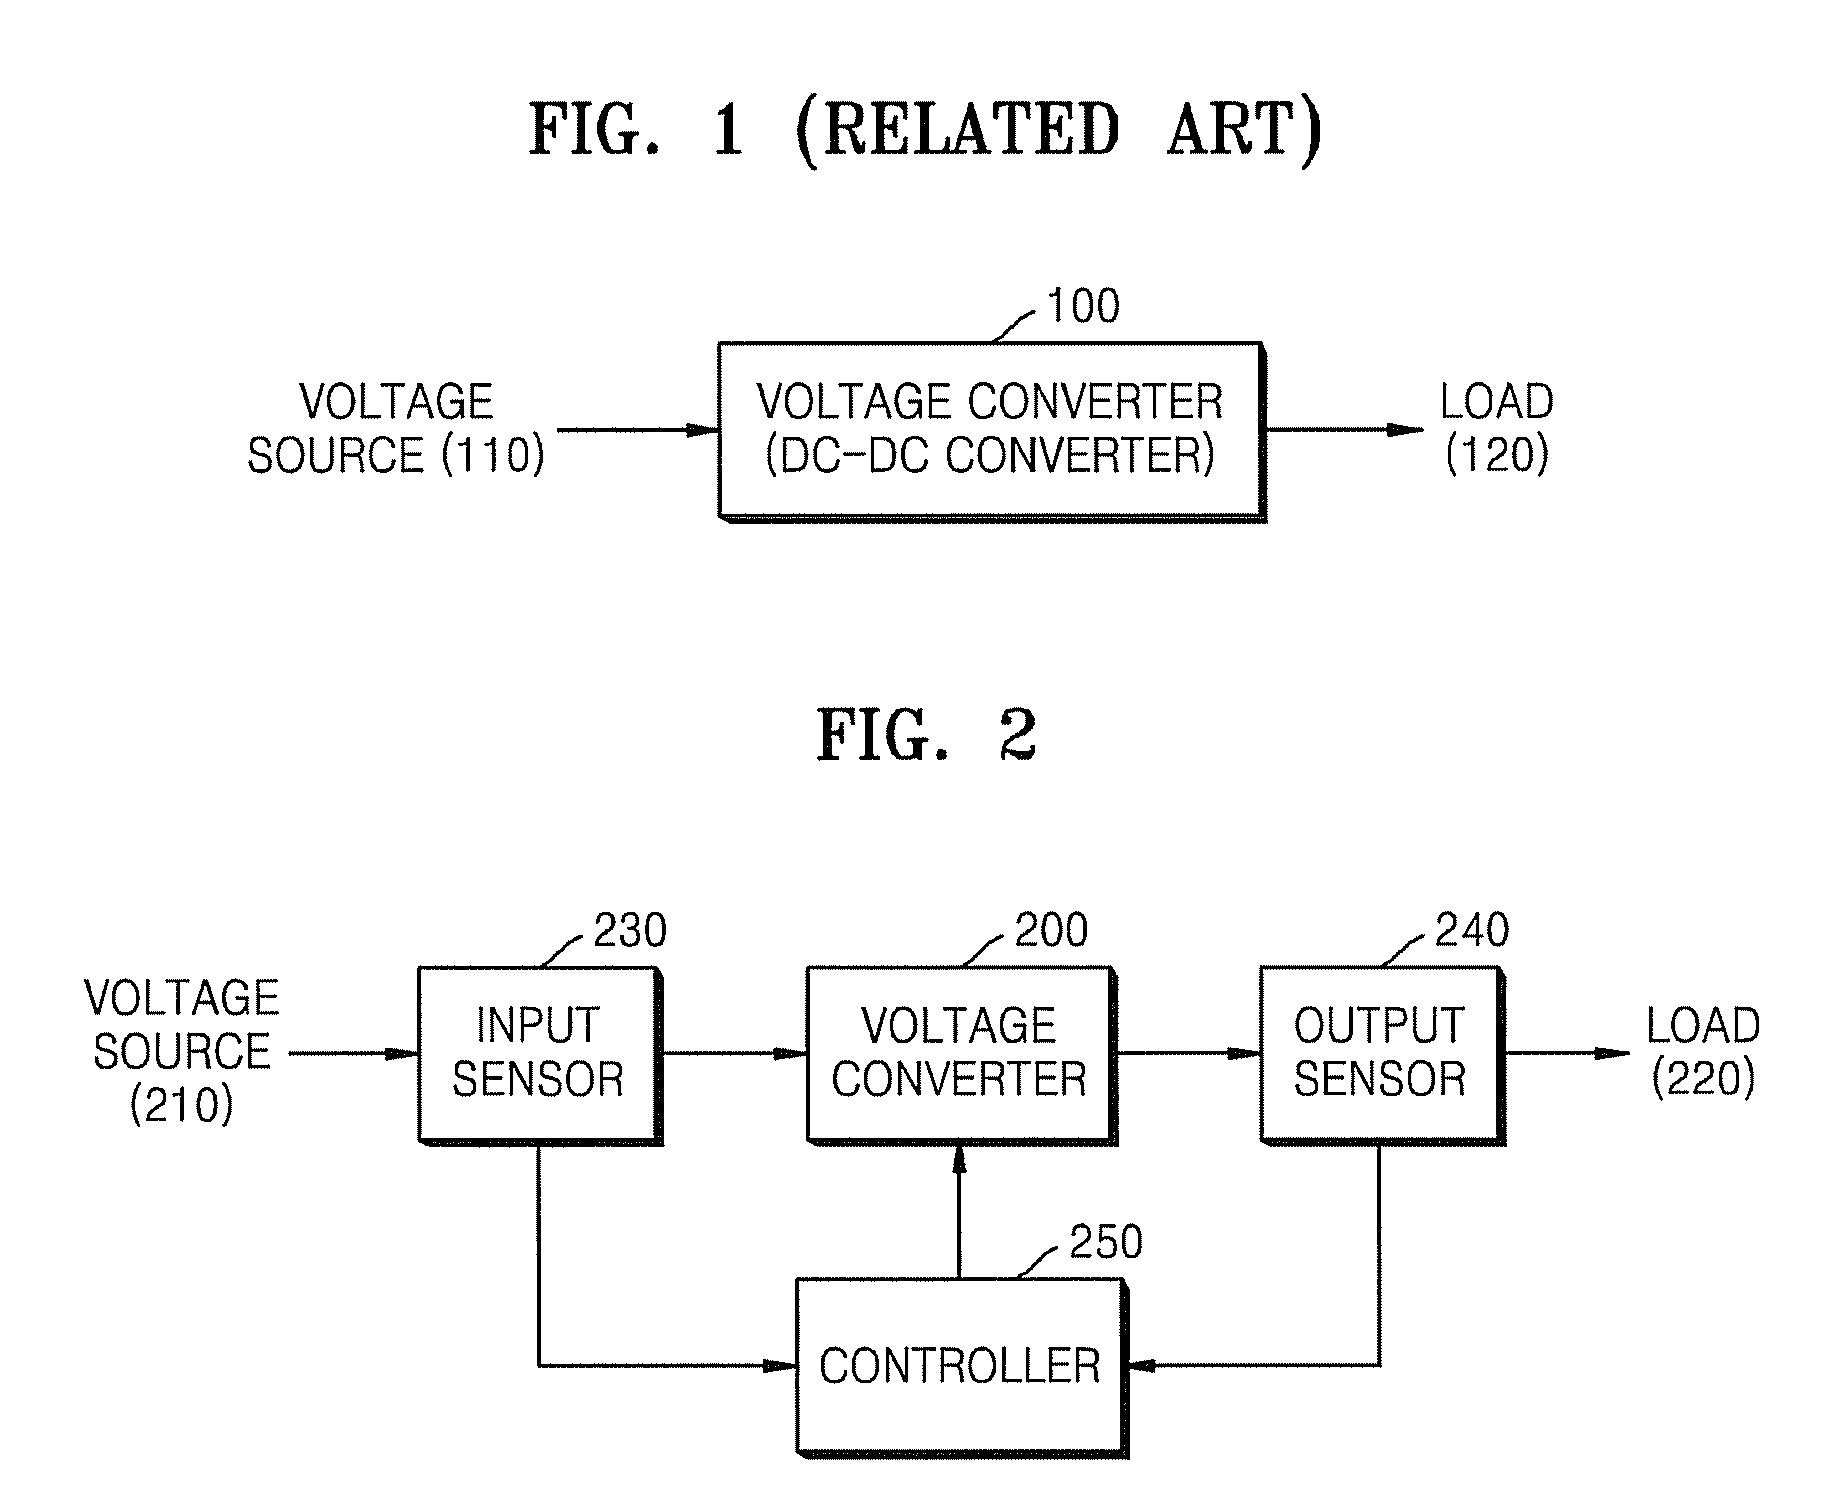 Method and apparatus to control voltage conversion mode